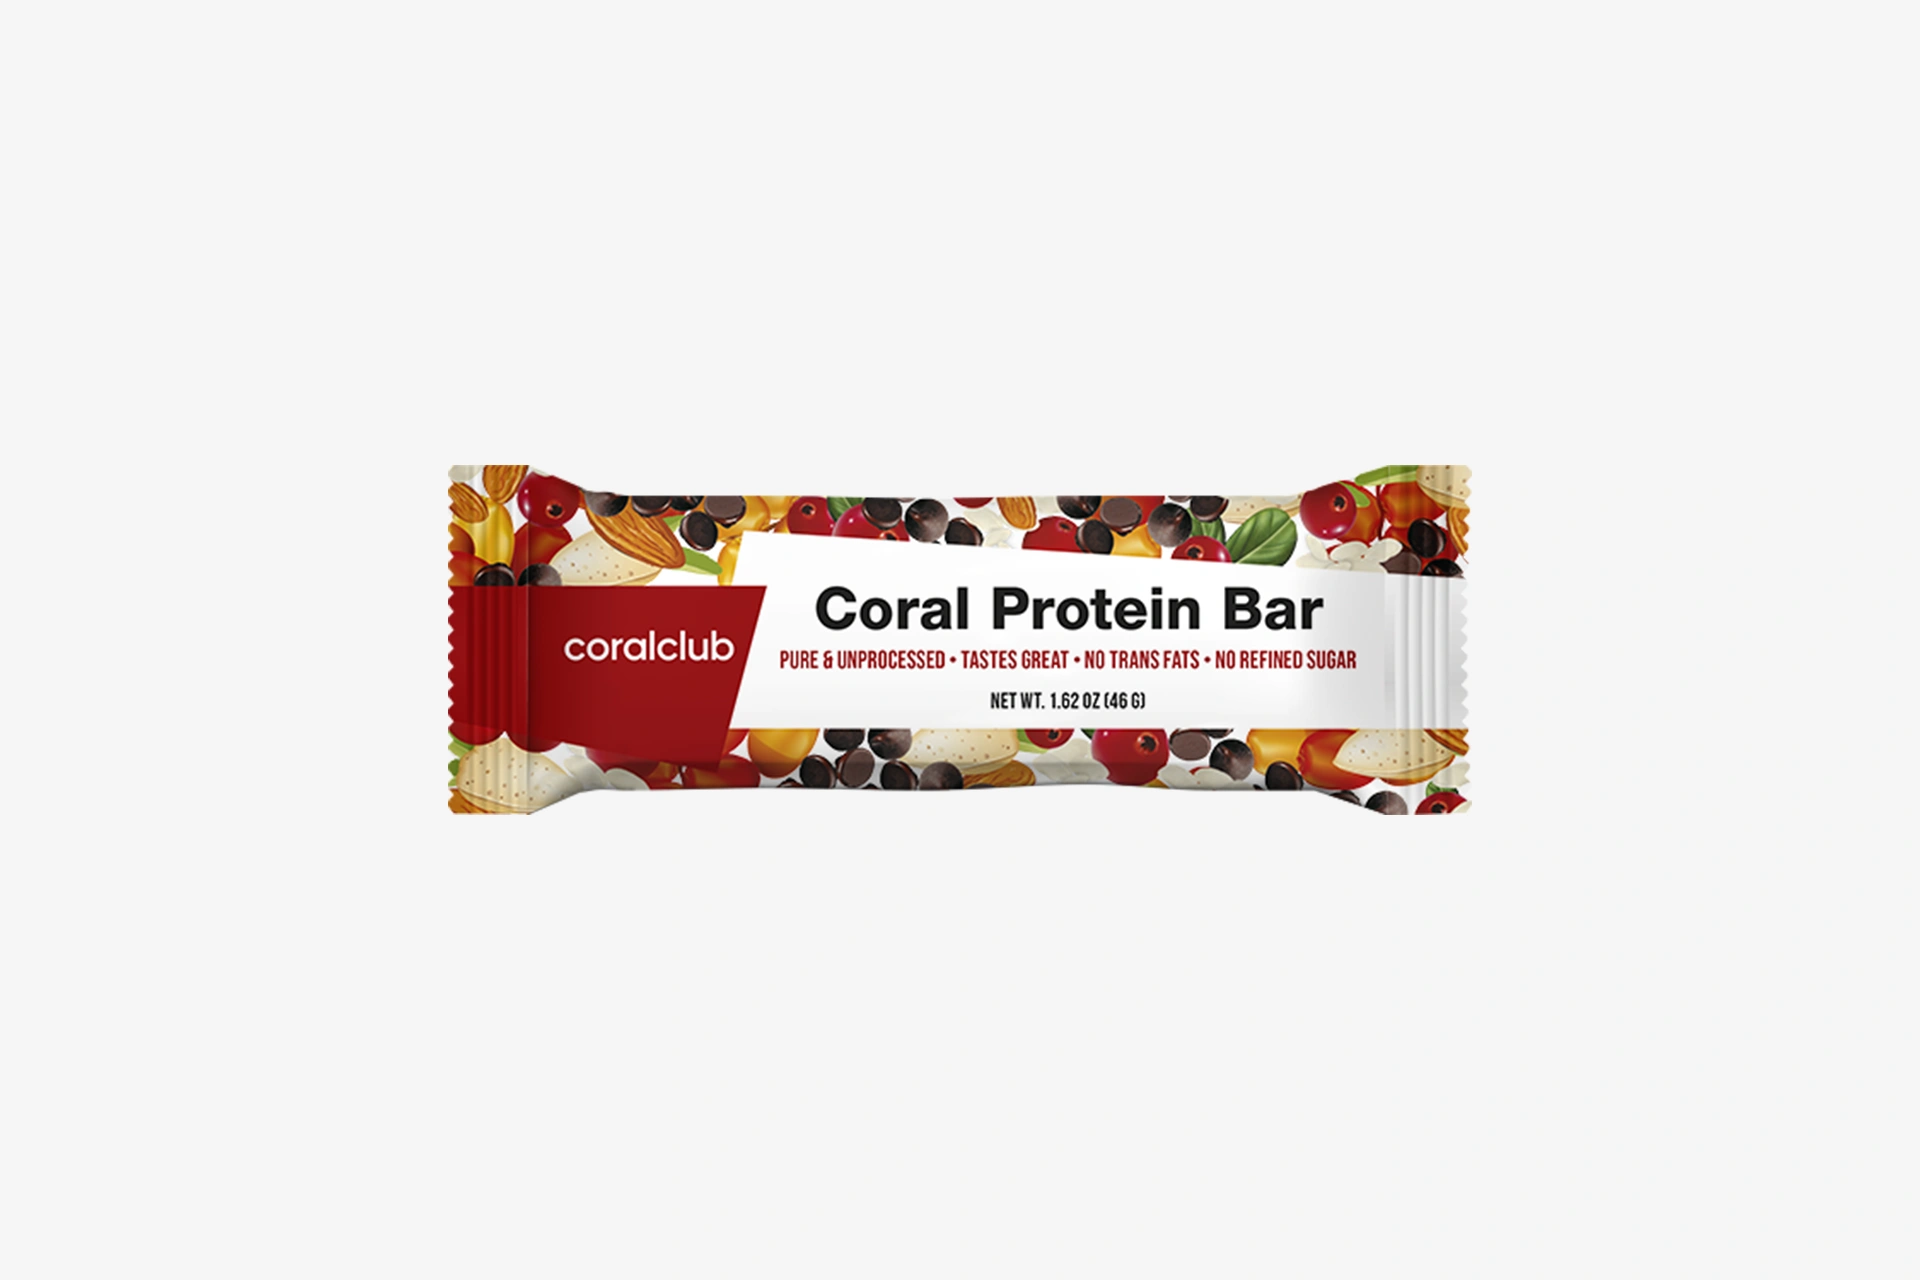 Coral Protein Bar